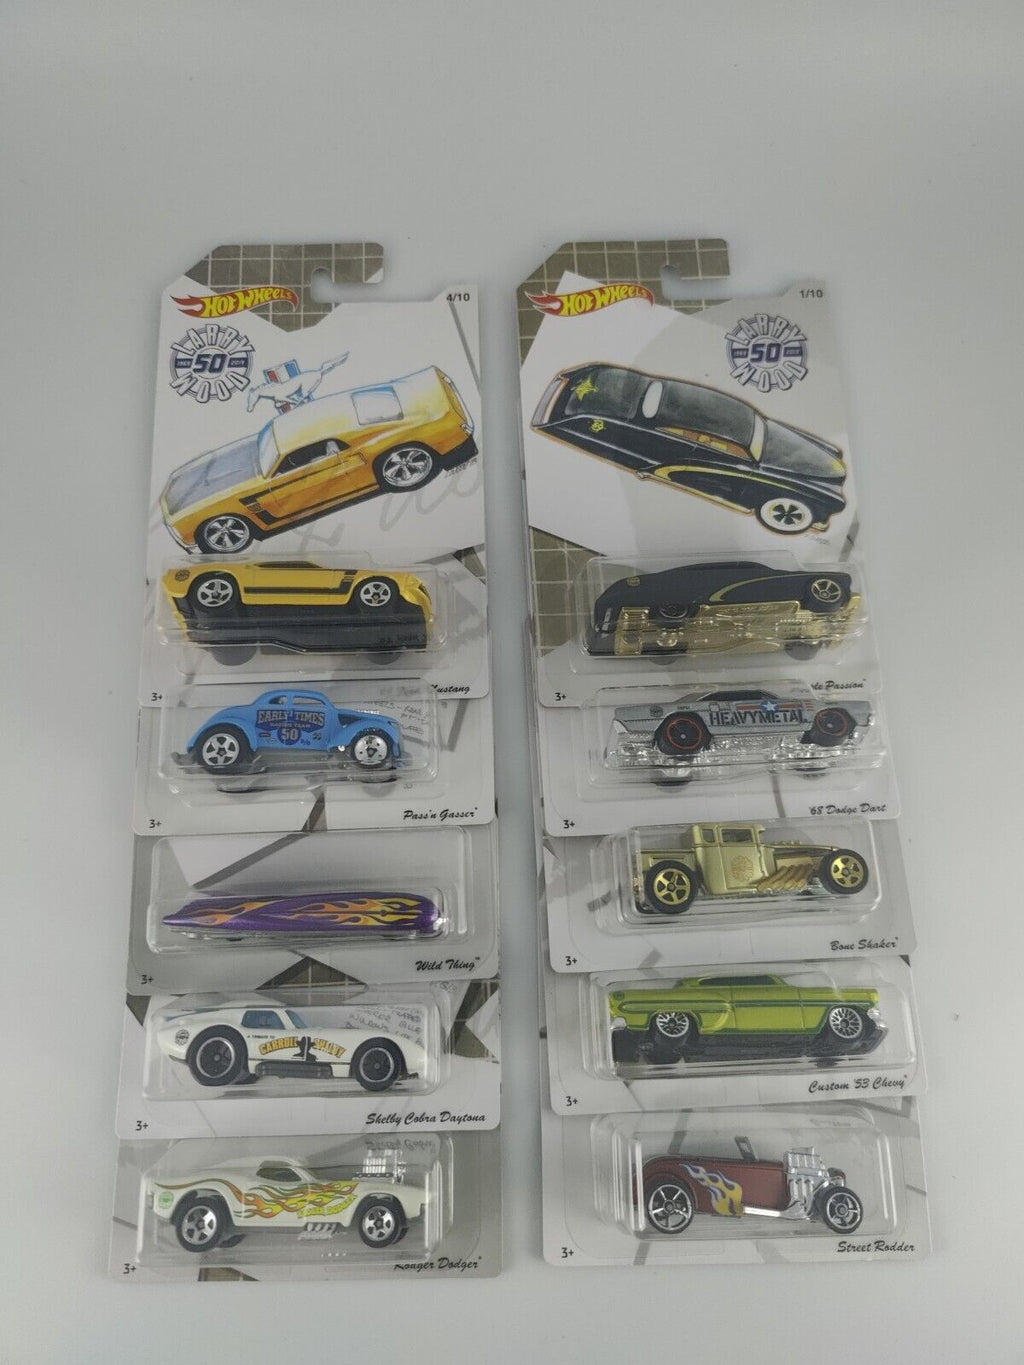 2019 Hot Wheels Larry Wood 50th Anniversary Collection Full Set of 10